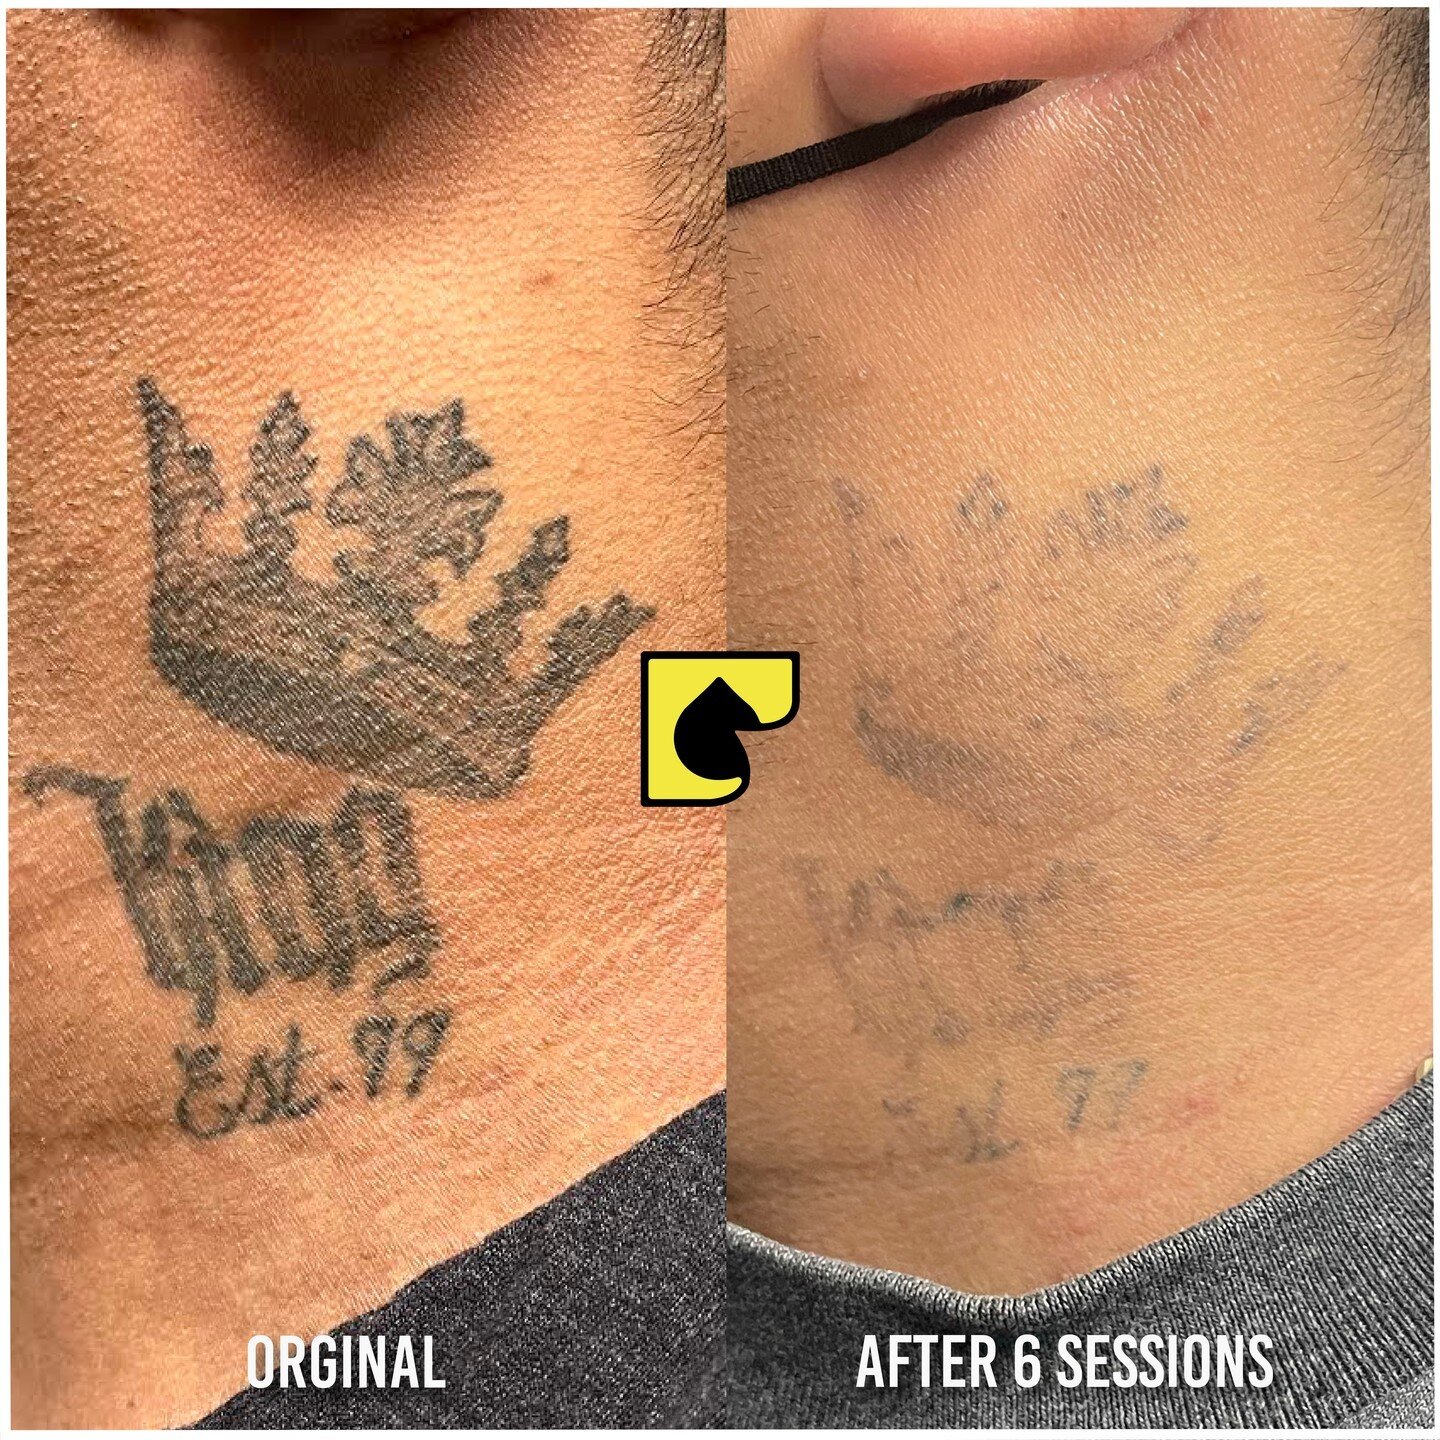 We make it easy to erase your past. The year is nearing to the end which makes it a perfect time for a new beginning
Call us on ☎️ (562) 861-9400 or contact us through our website by clicking the link in our bio 👈

*All results may vary per individu